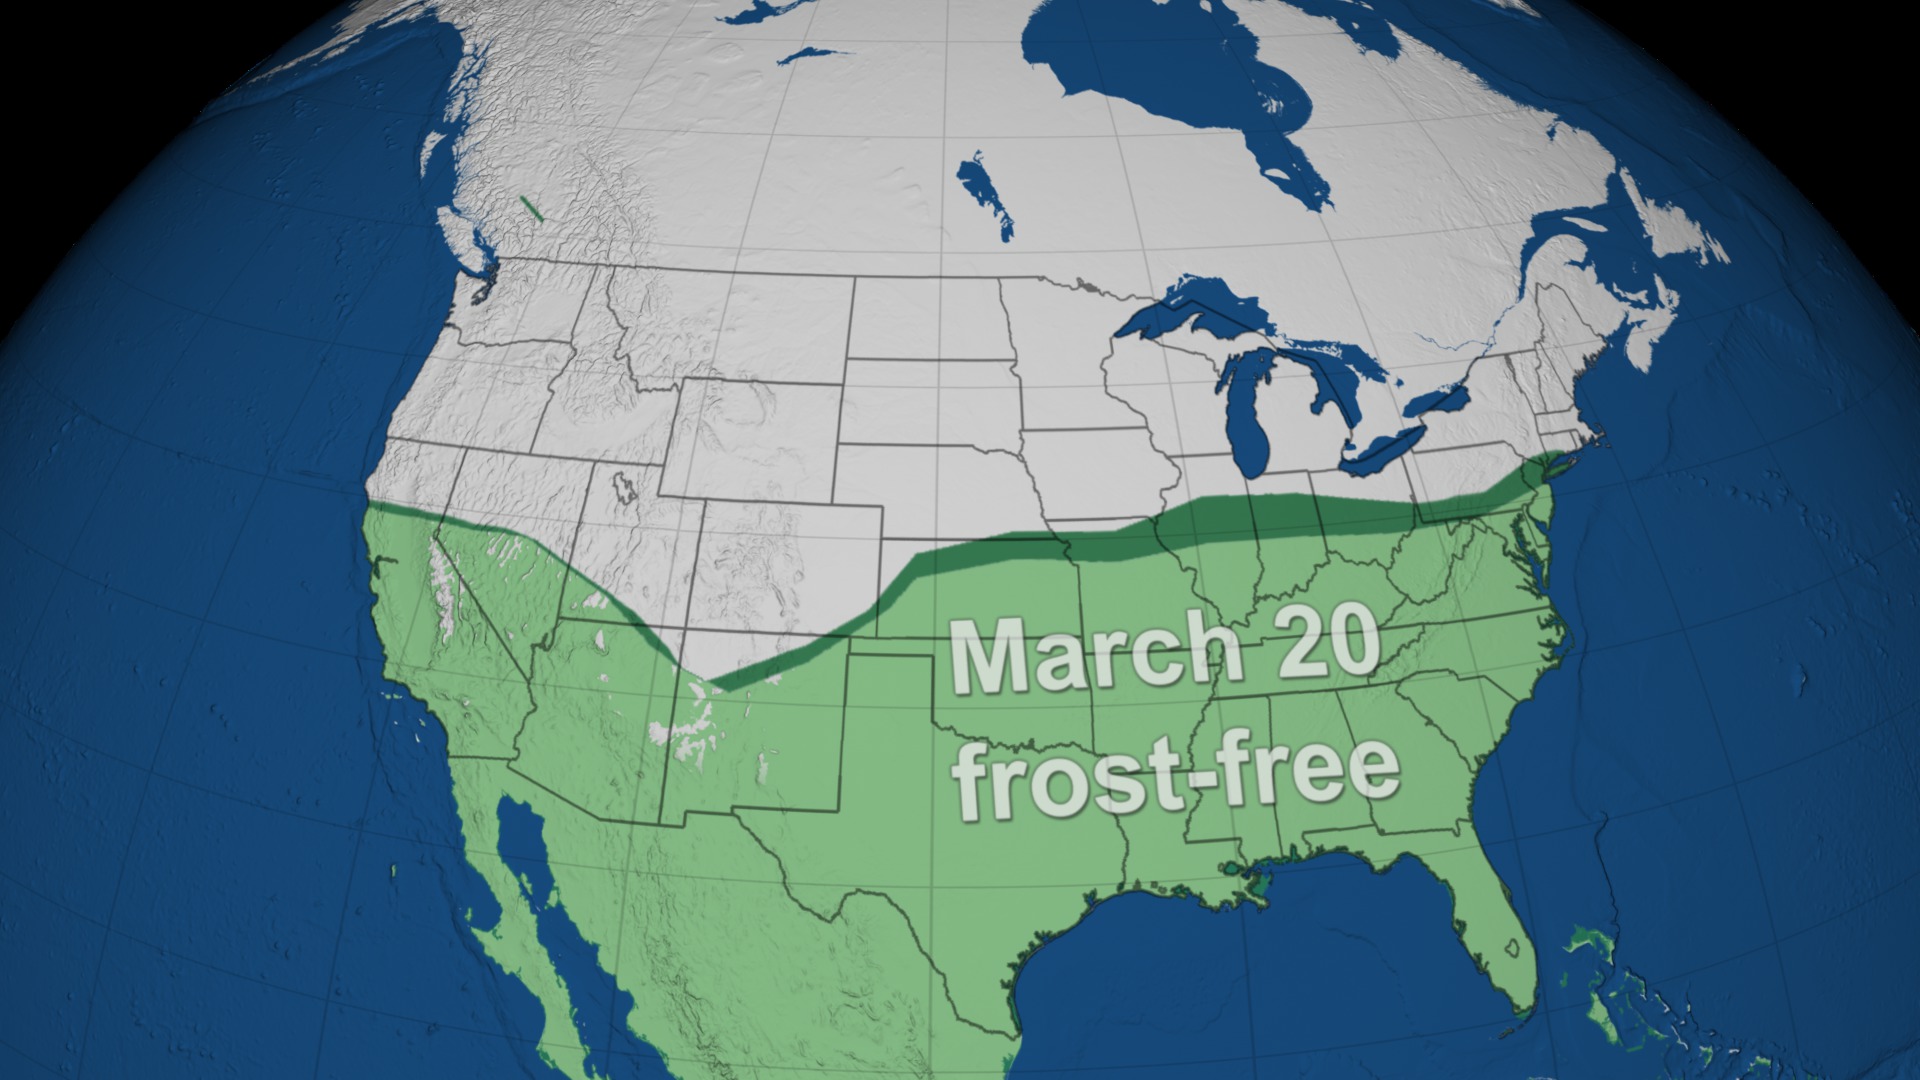 March 20 frost-free regions over North America.  Light green is the 1950-1952 average, darker green is the additional area for the 2009-2011 average.This video is also available on our YouTube channel.